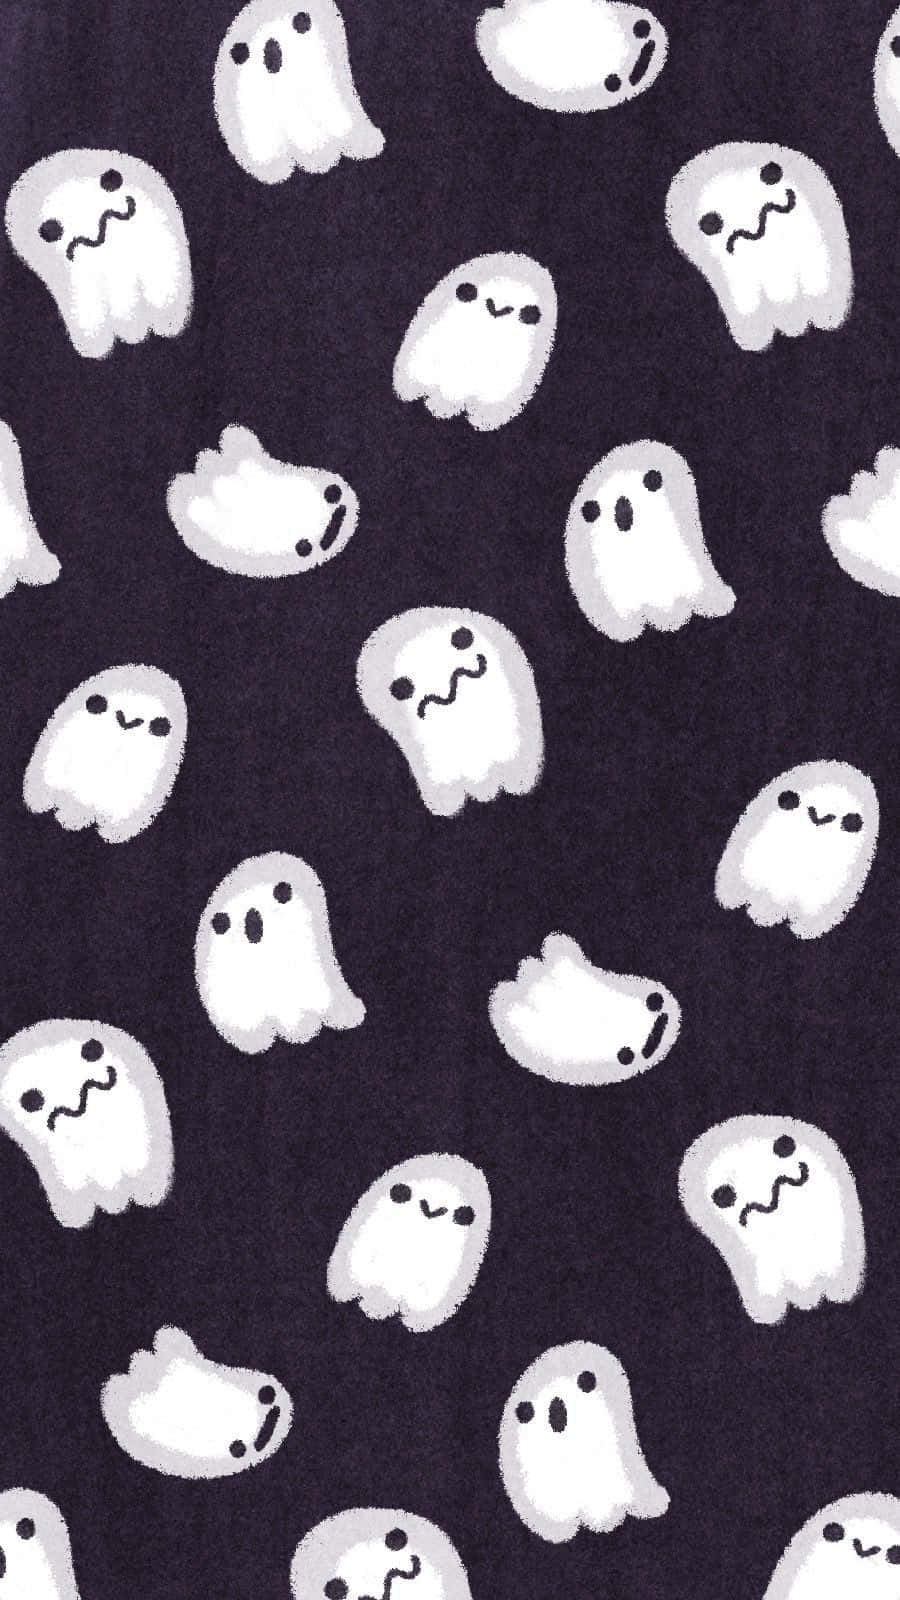 Adorable Spooky Ghost Floating in the Night Sky Wallpaper